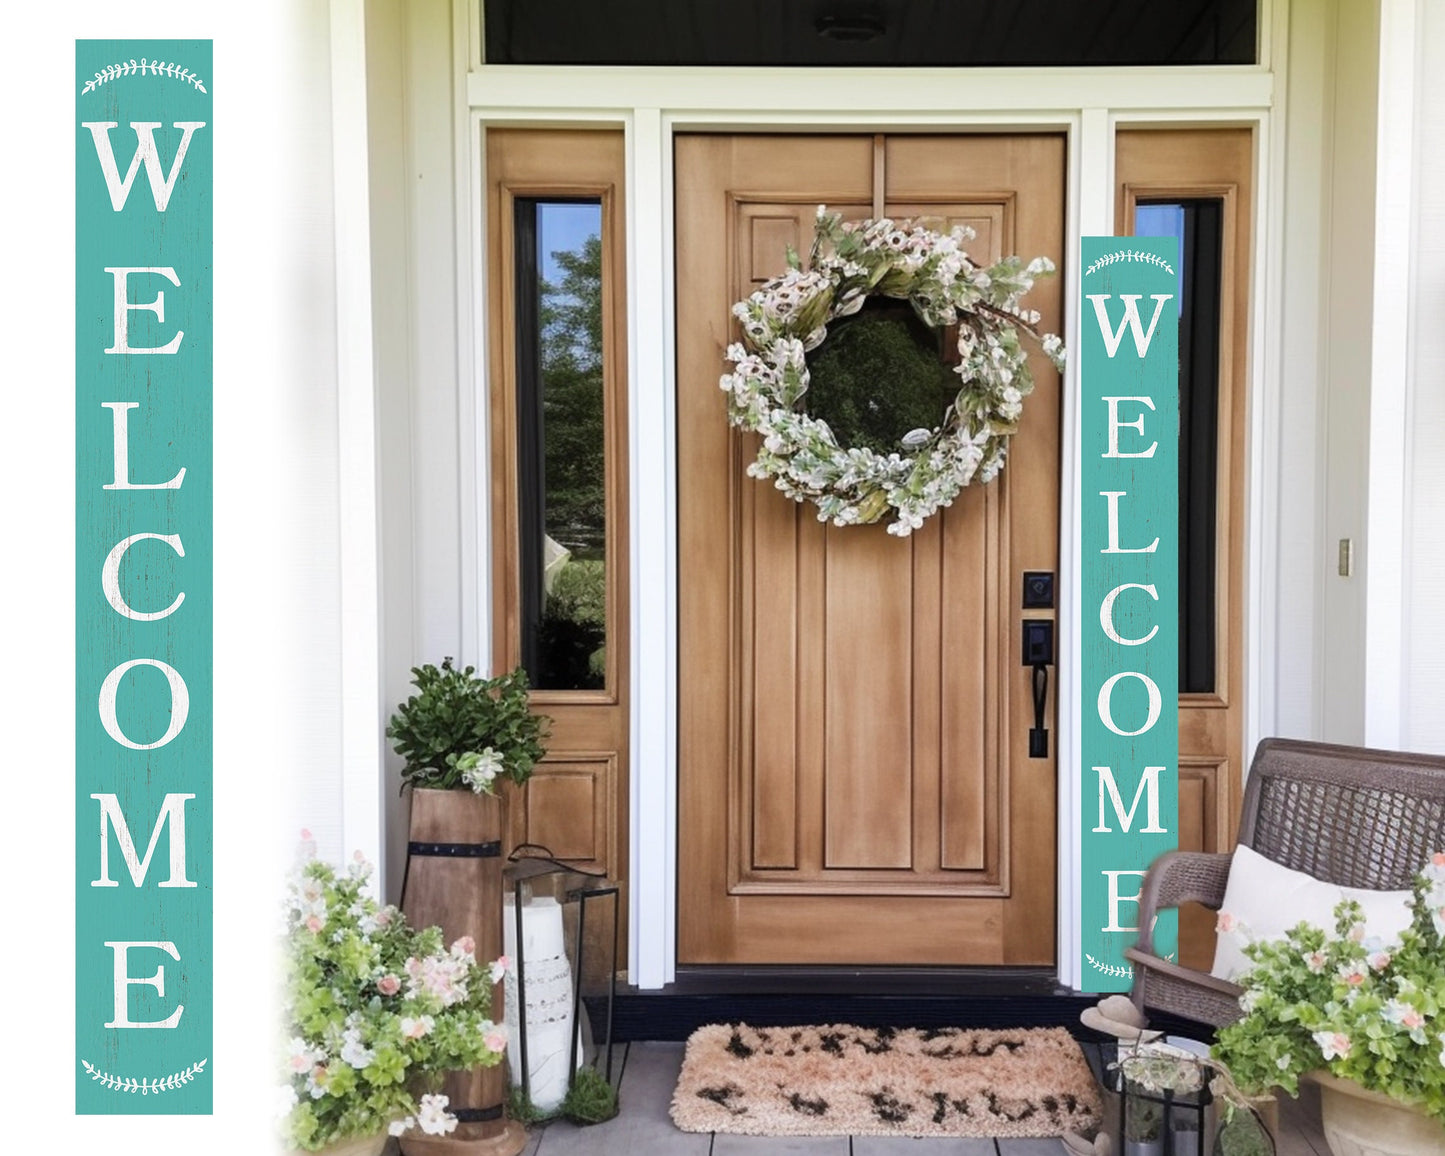 72-inch Blue Turquoise Outdoor Welcome Sign | Rustic Front Door Sign | Foldable and Portable | UV Protected and Sealed